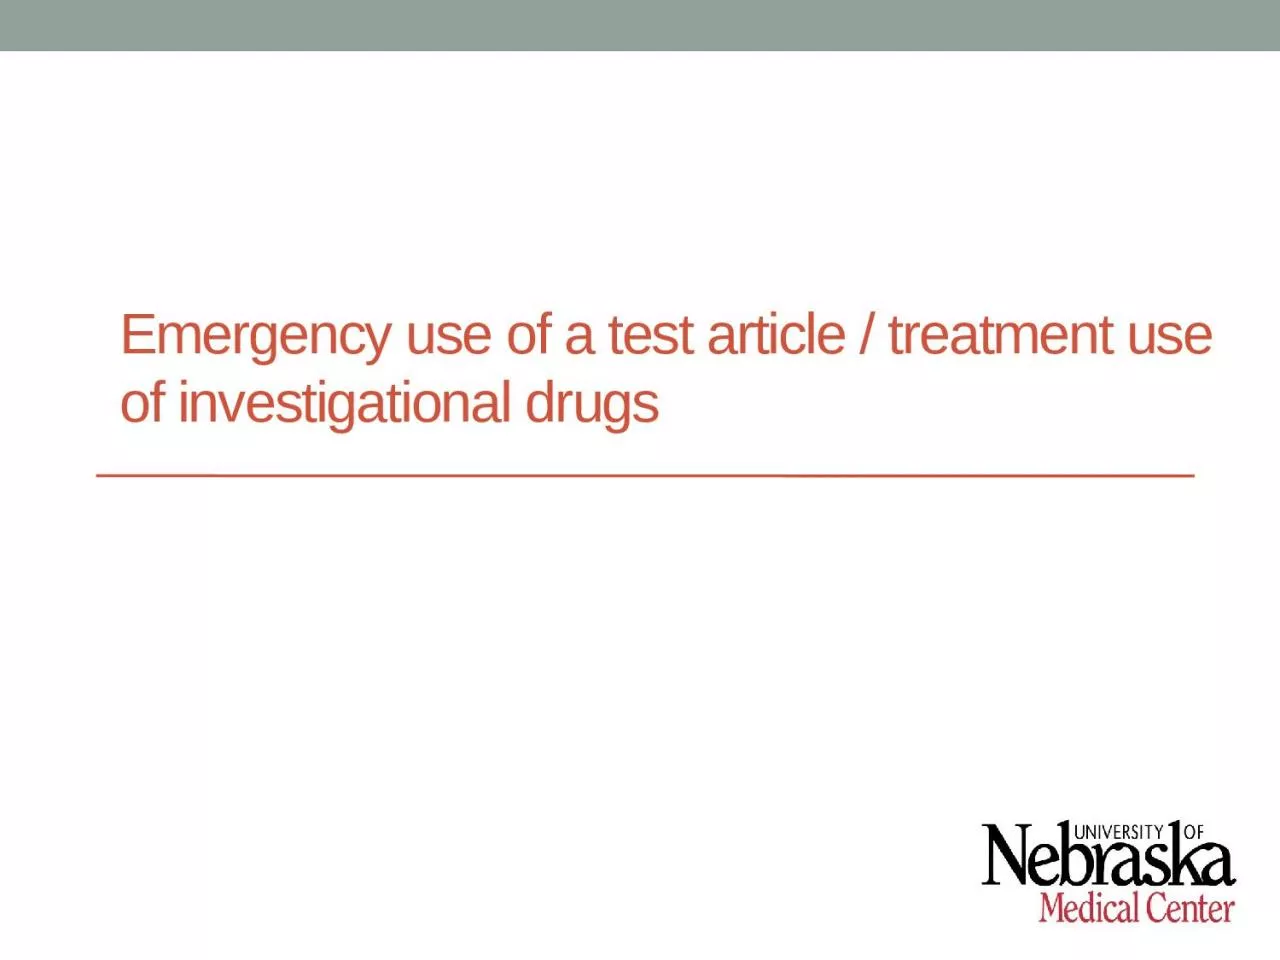 Emergency use of a test article / treatment use of investigational drugs